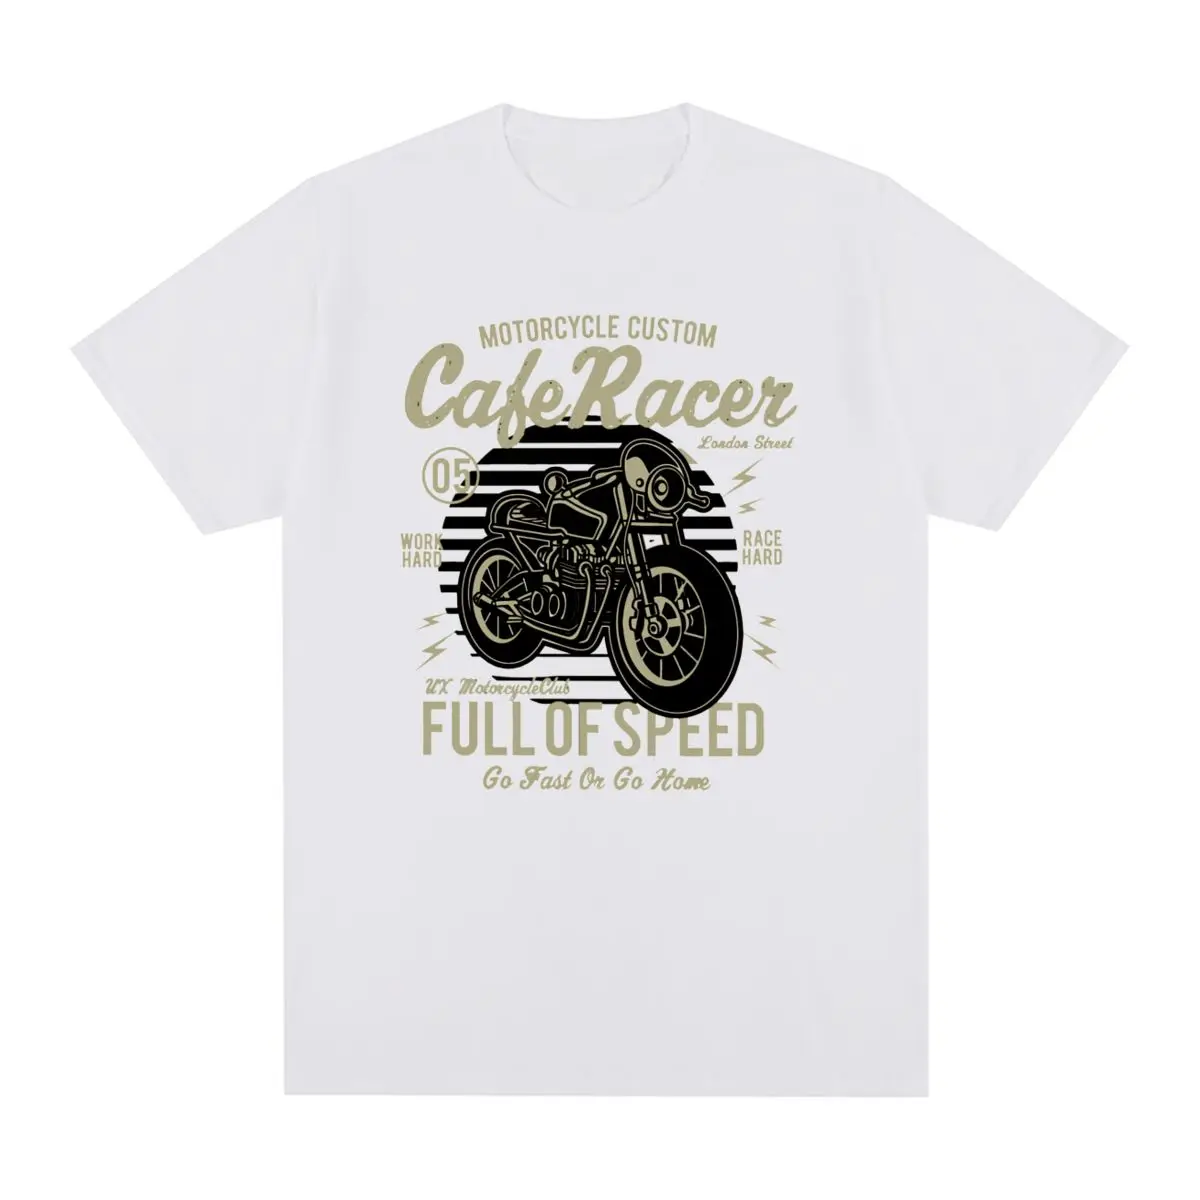 

Cafe Racer Vintage T-shirt Motorcycle Road Rash Speed Happiness Fashionable Summer Cotton Men T shirt New Tee Tshirt Womens Tops